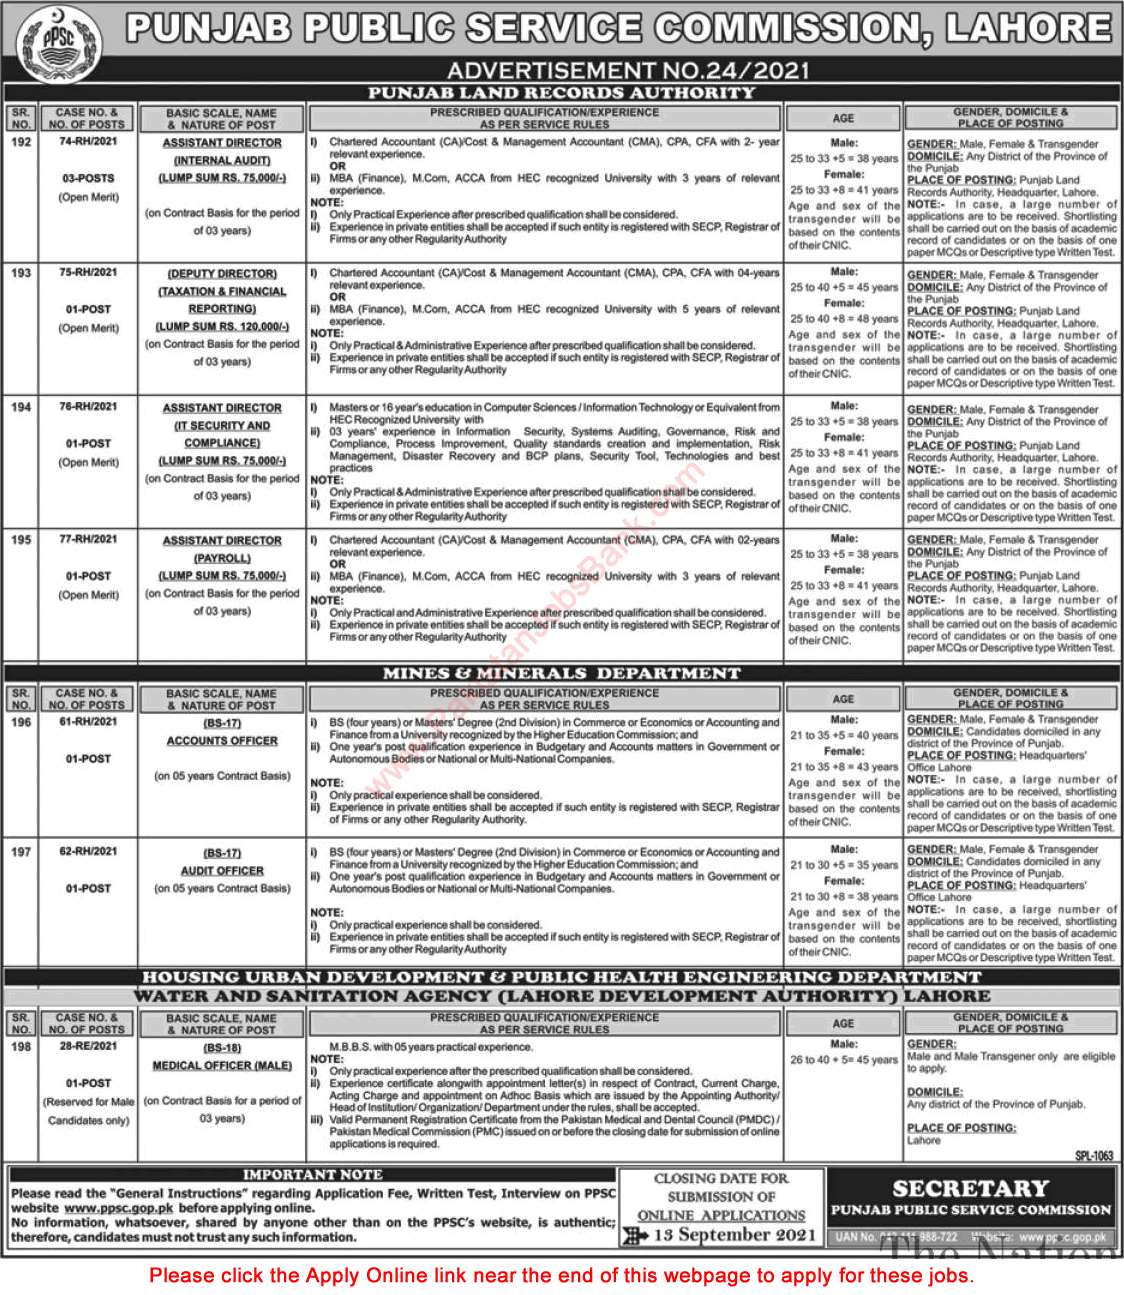 PPSC Jobs August 2021 September Apply Online Consolidated Advertisement No 24/2021 Latest